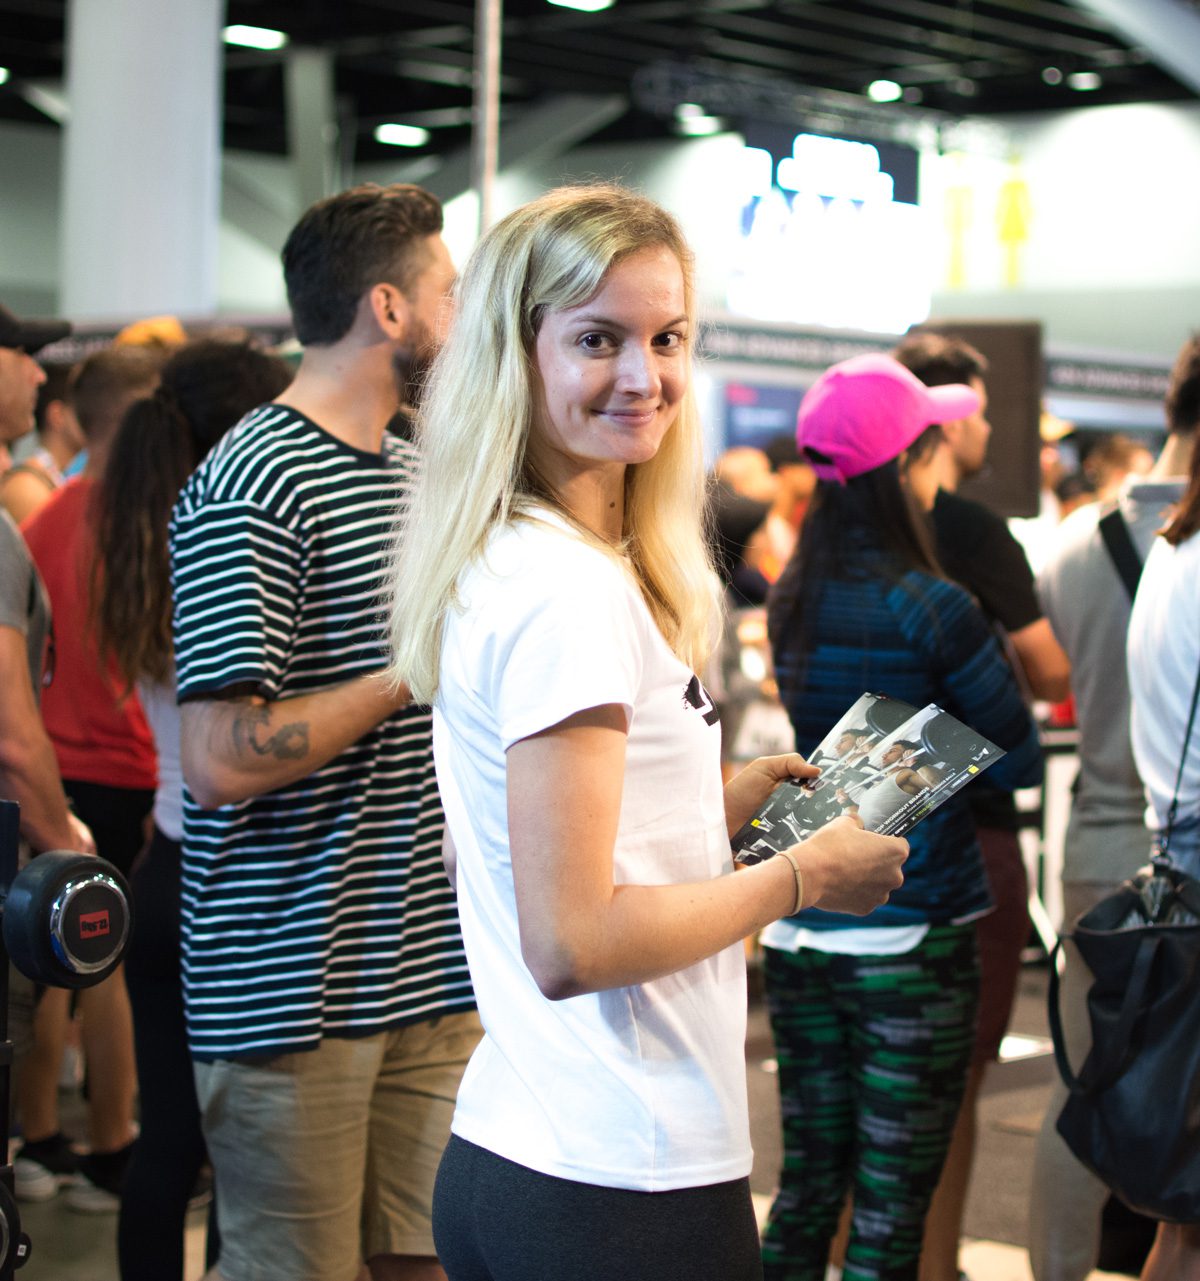 A smiling brand ambassador distributing flyers to people attending an event